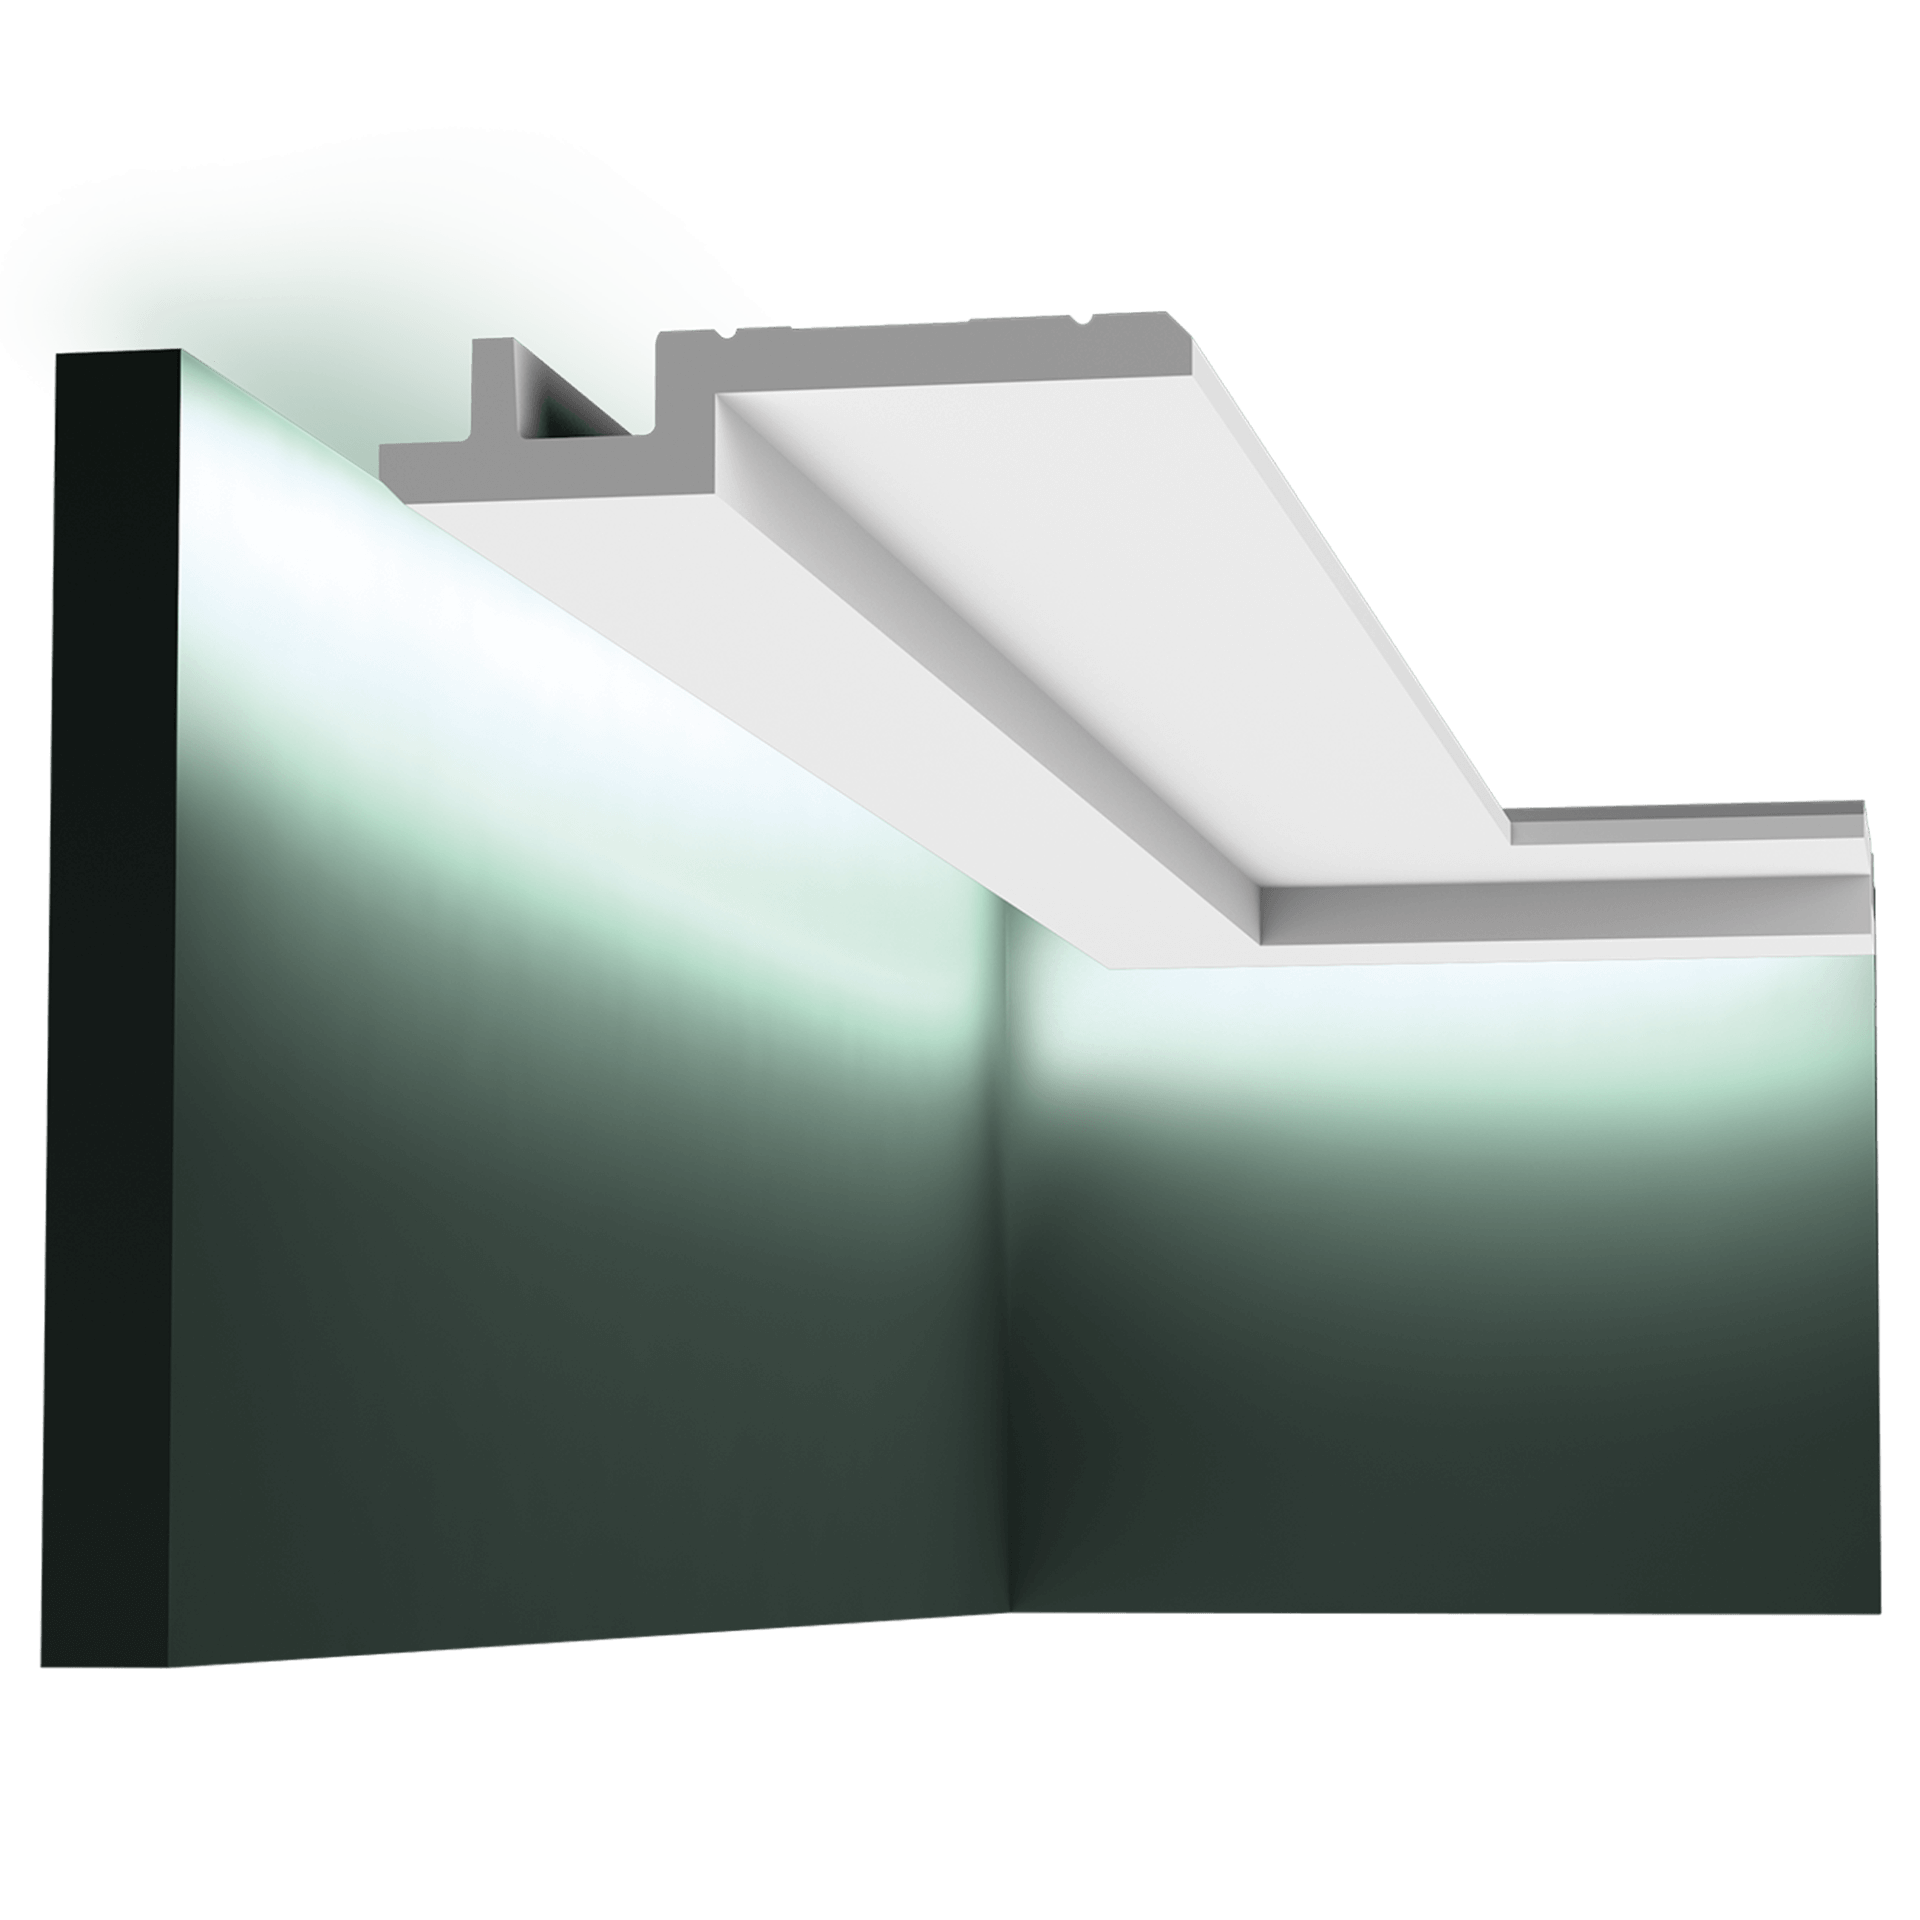 c395 downlighter 0af9 This clean, modern profile from the Steps range can also be used to conceal LED lighting. The angled corners above and below provide additional subtle shadow lines. Designed by Orio Tonini.